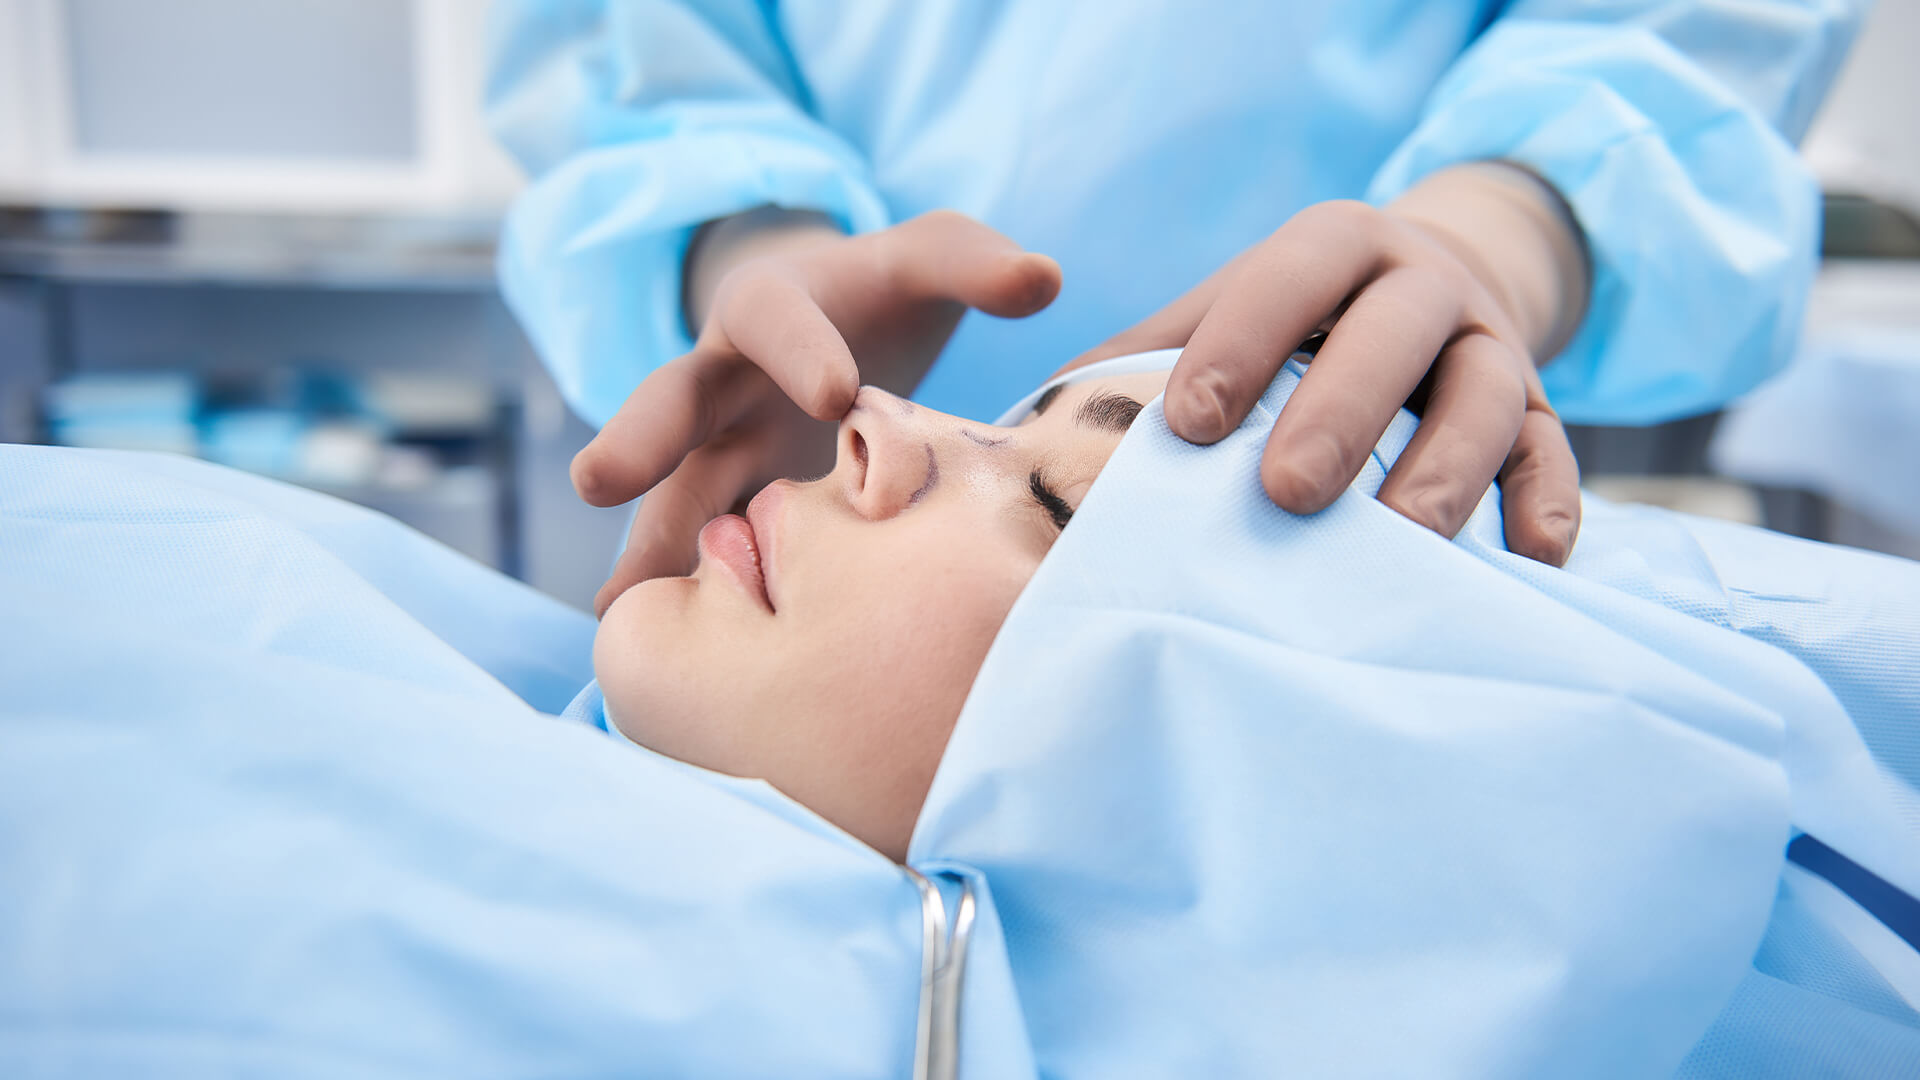 Is Rhinoplasty Really Reversible? Surgeon Comments Why It Shouldn’t Be Attempted